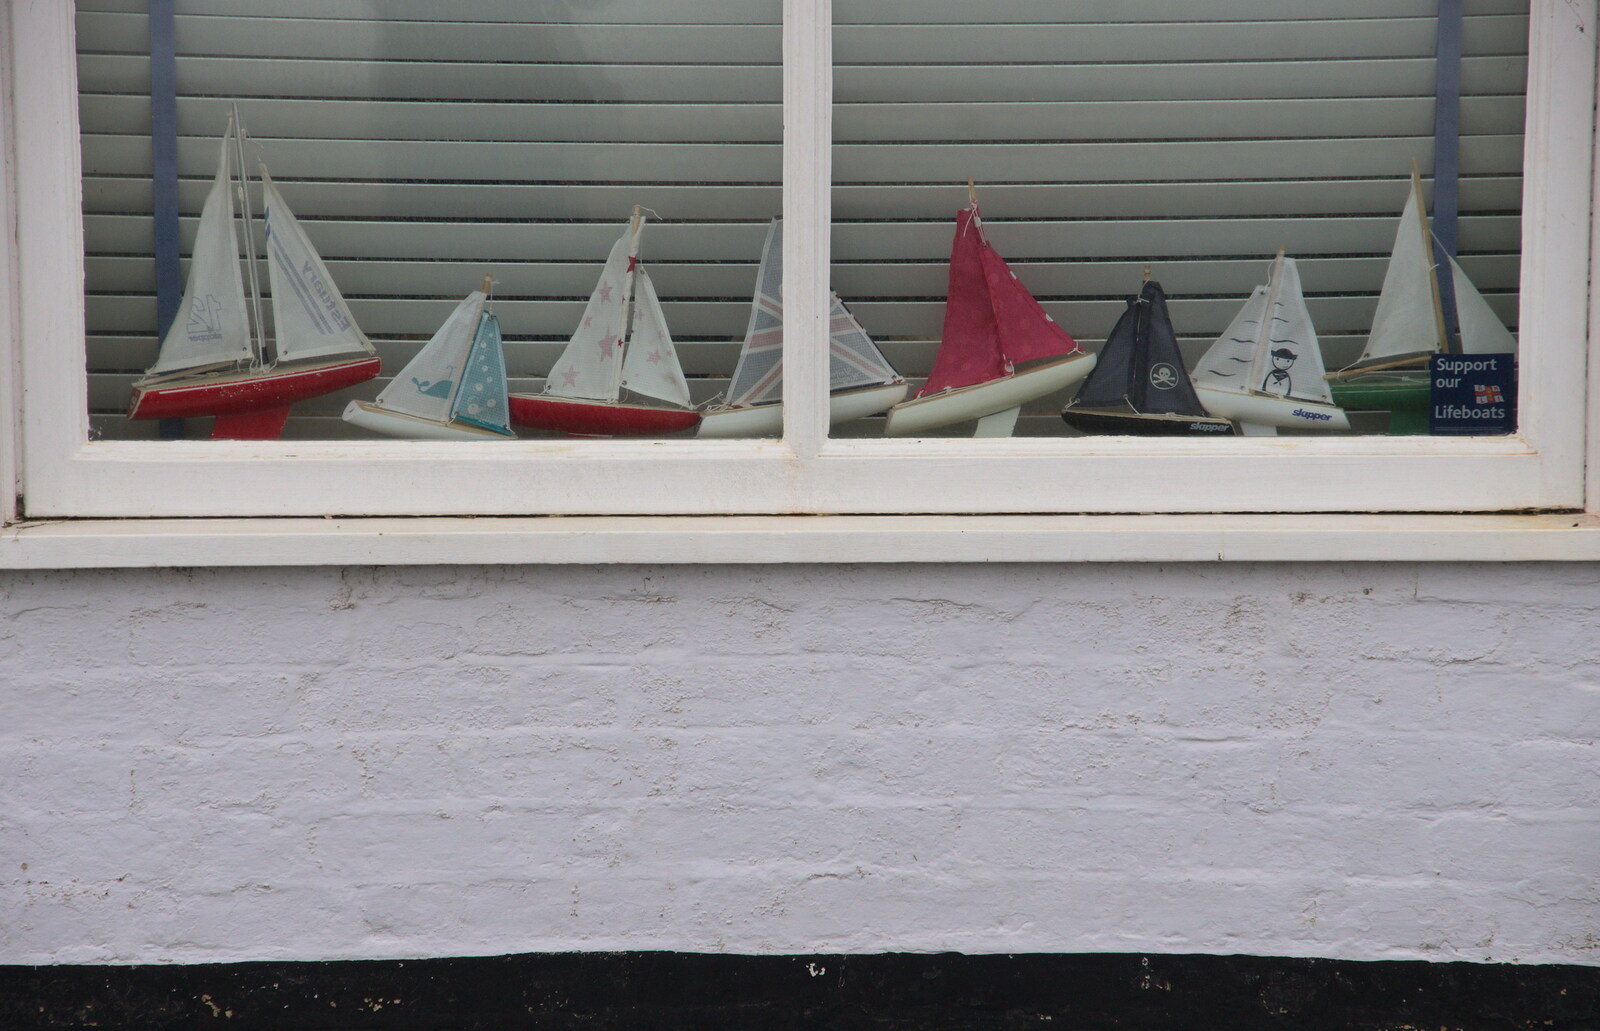 Toy boats in a window from A Postcard from Aldeburgh, Suffolk - 6th January 2019